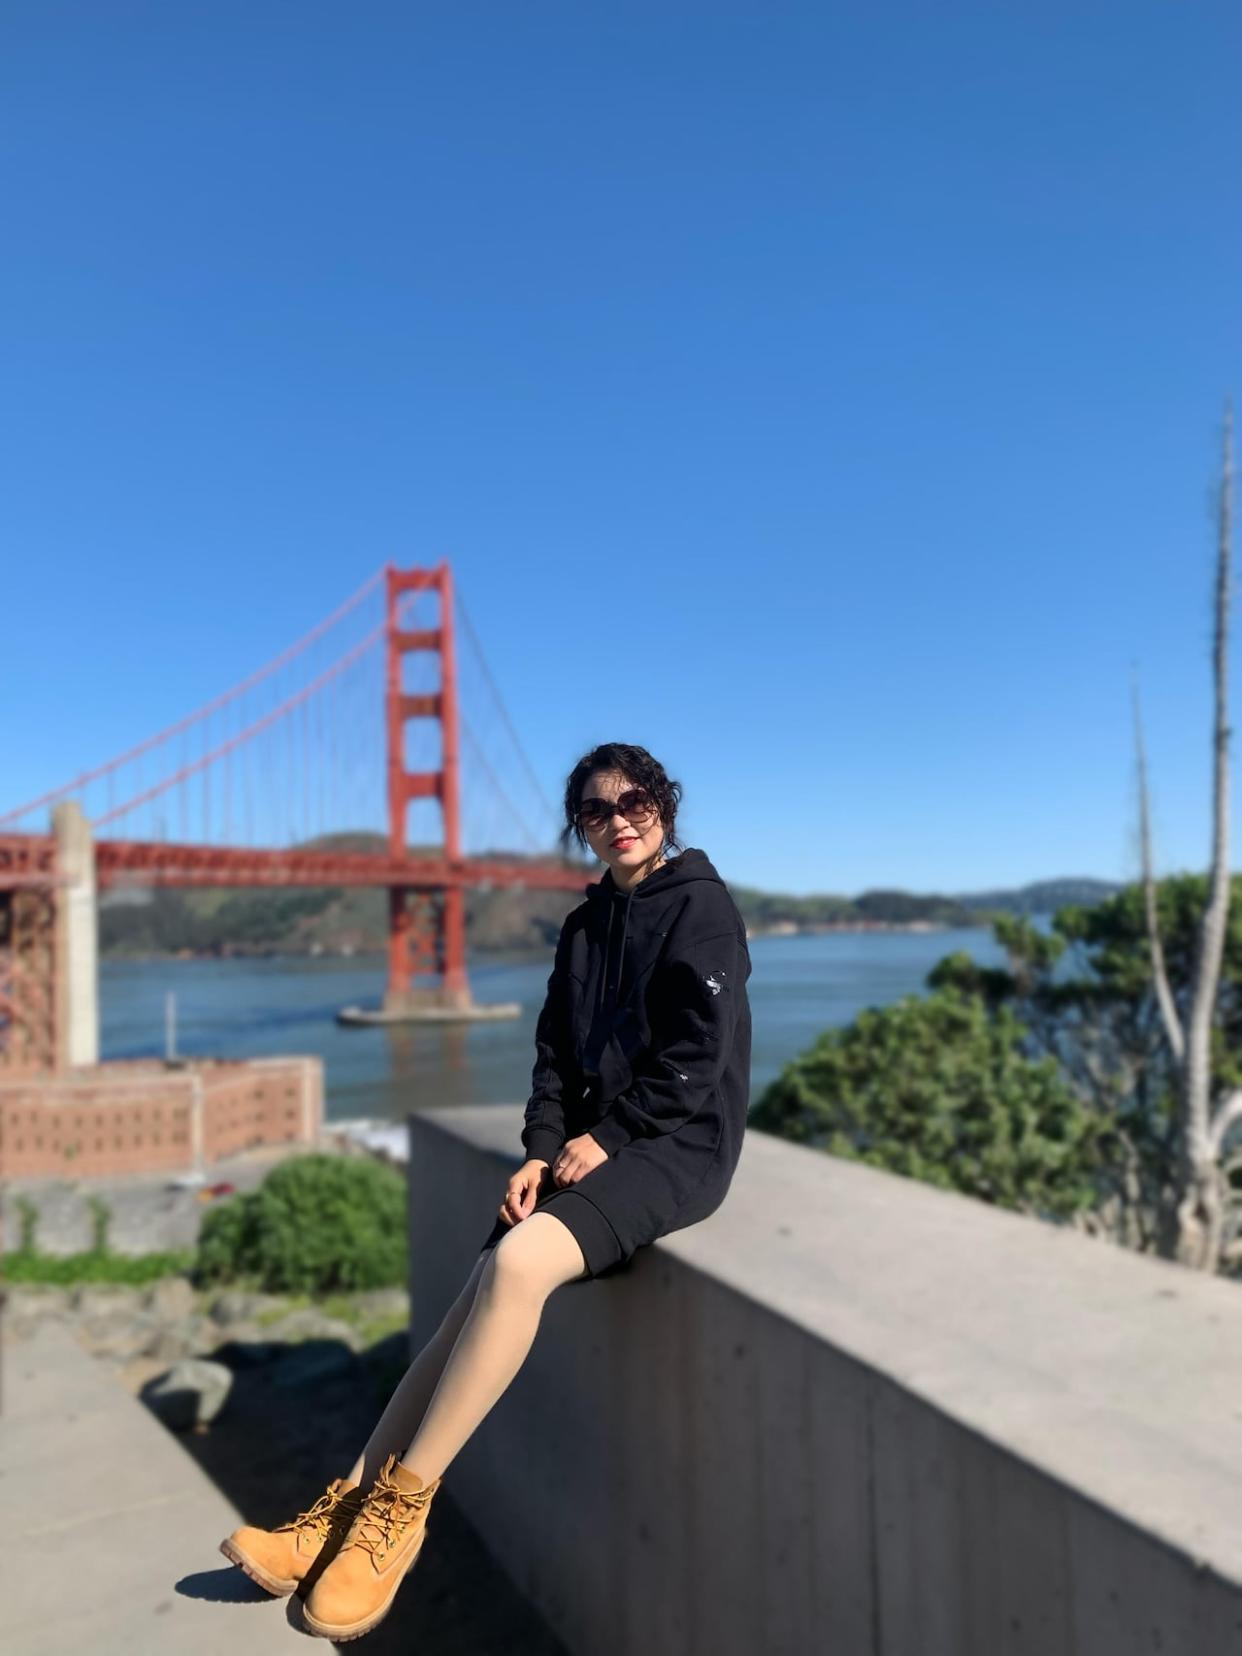 Hellen Ma, pictured here in California, moved to Saskatoon from China in March and has been waiting for her husband to join her since then. (Submitted by Hellen Ma - image credit)